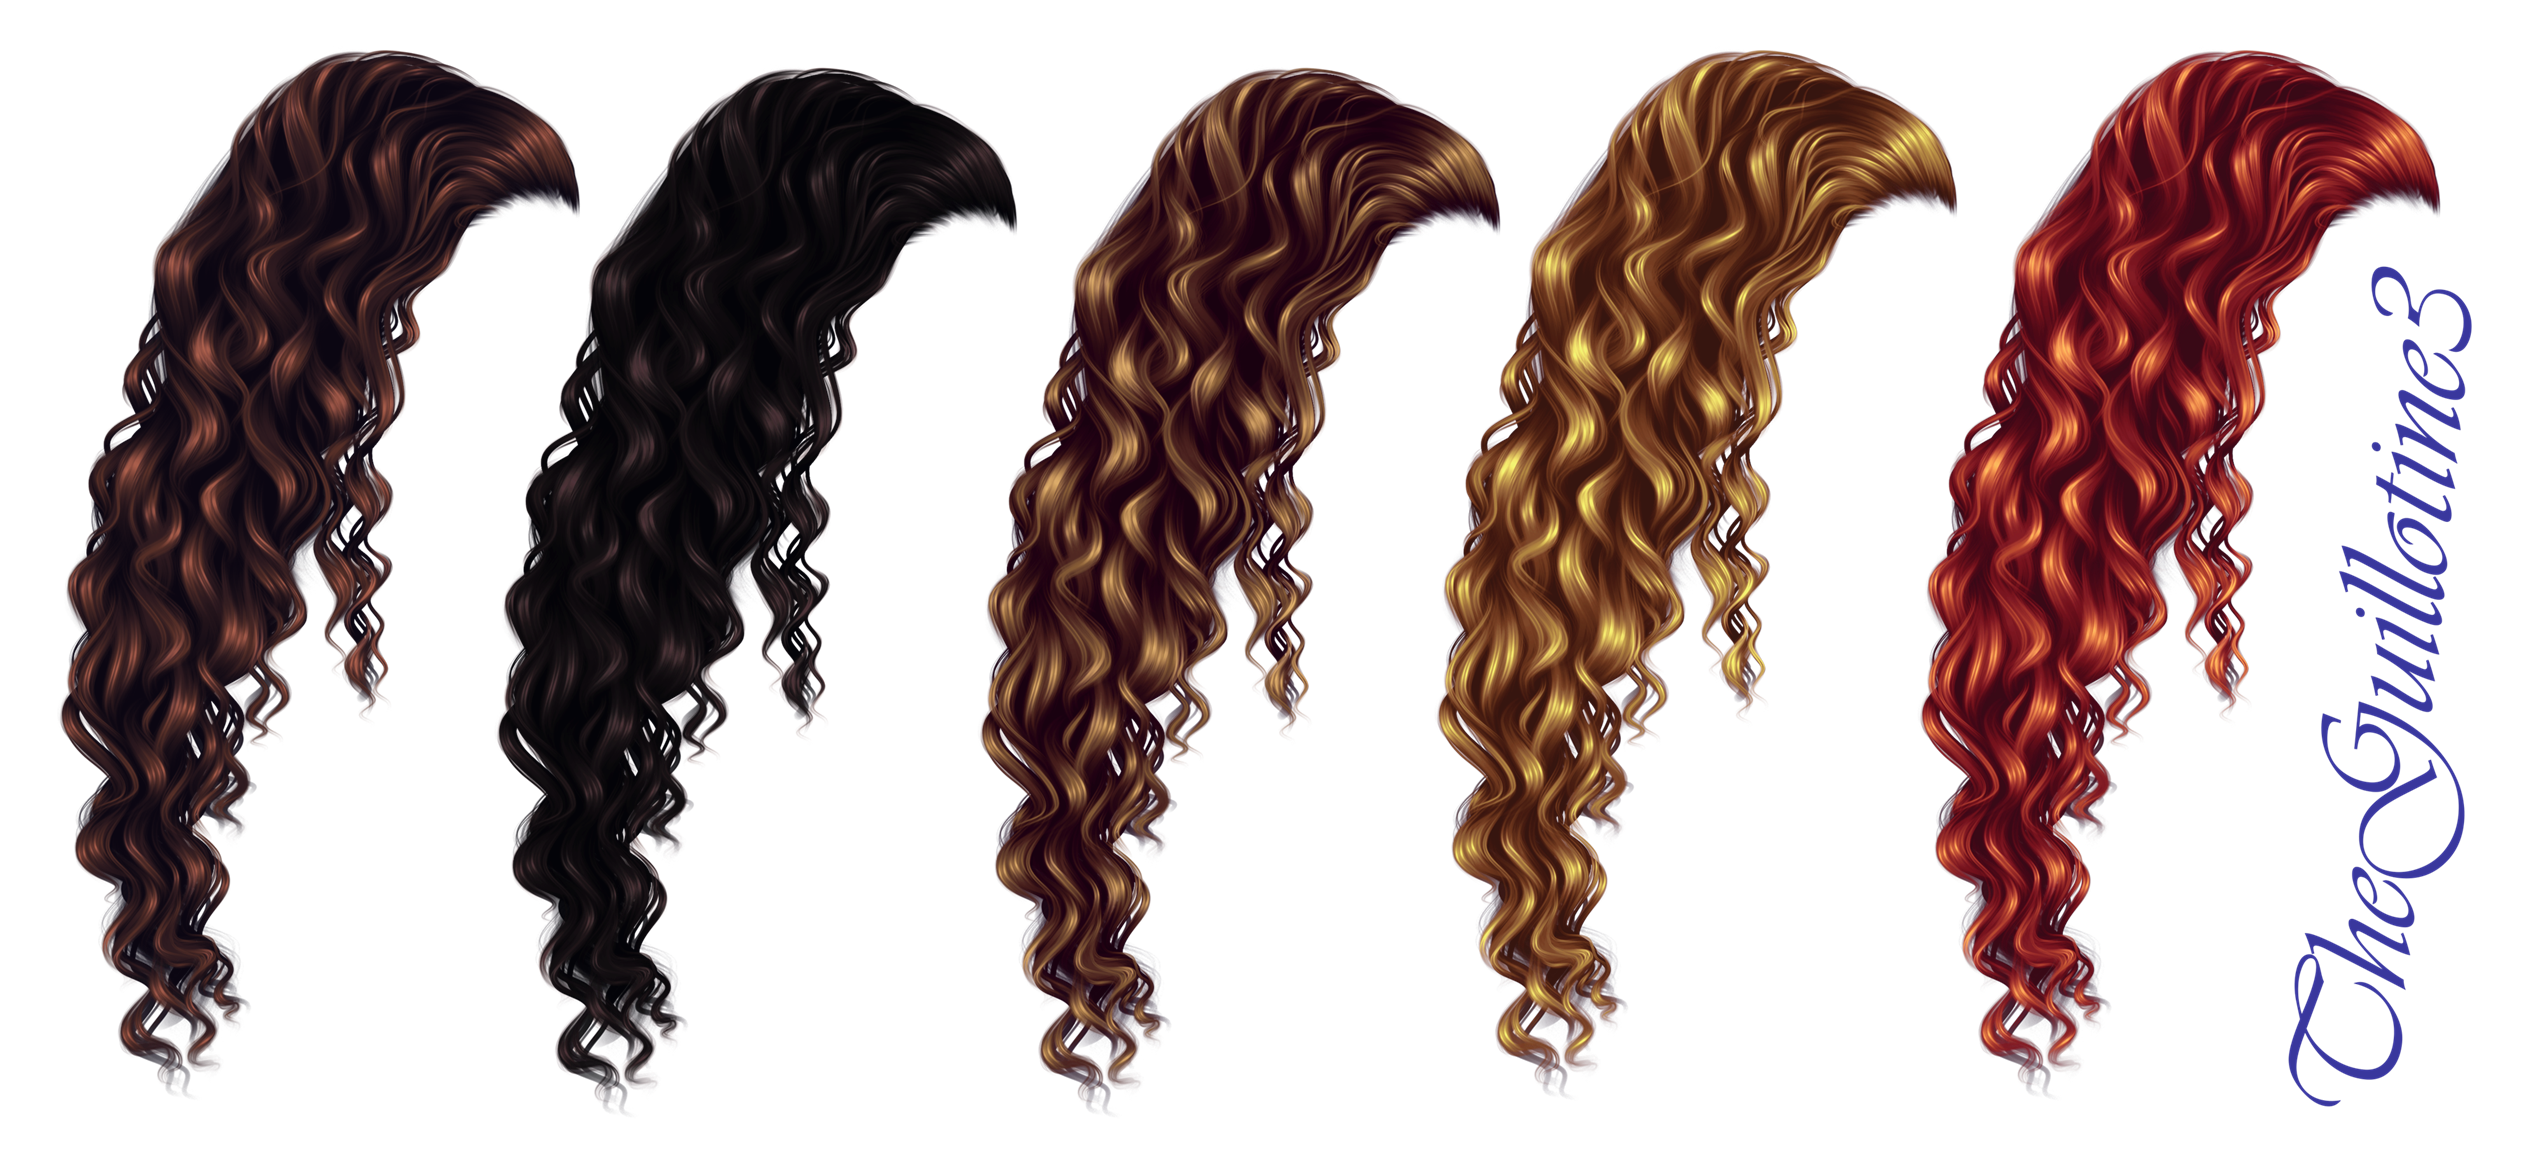 Curly Women Hair PNG Images Transparent Background | PNG Play